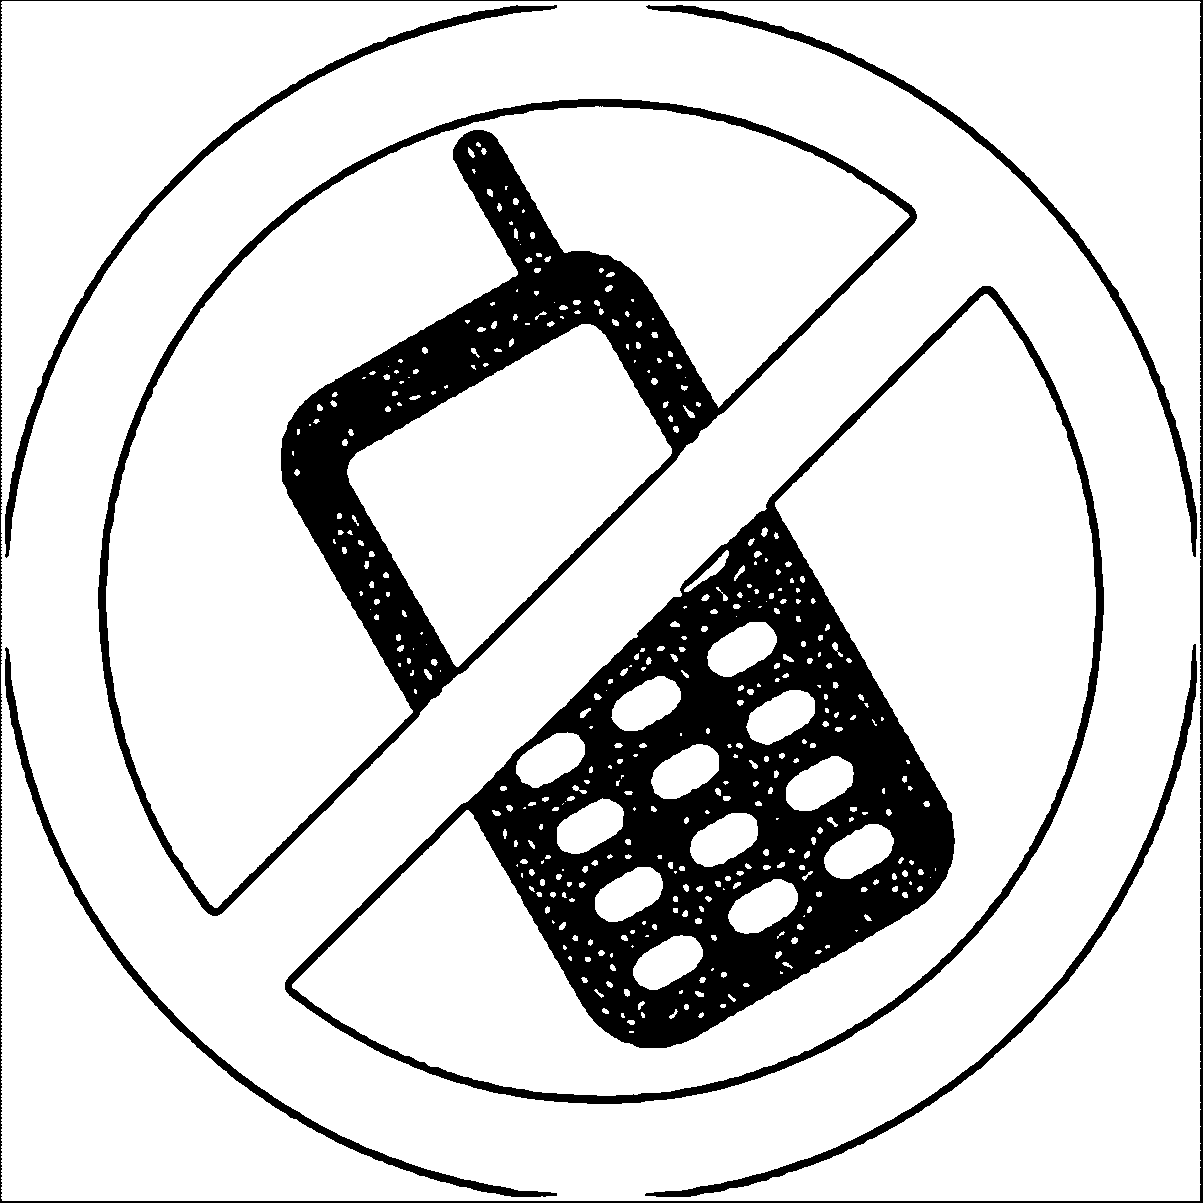 Any No Cell Phones Allowed Clip Coloring Page | Wecoloringpage